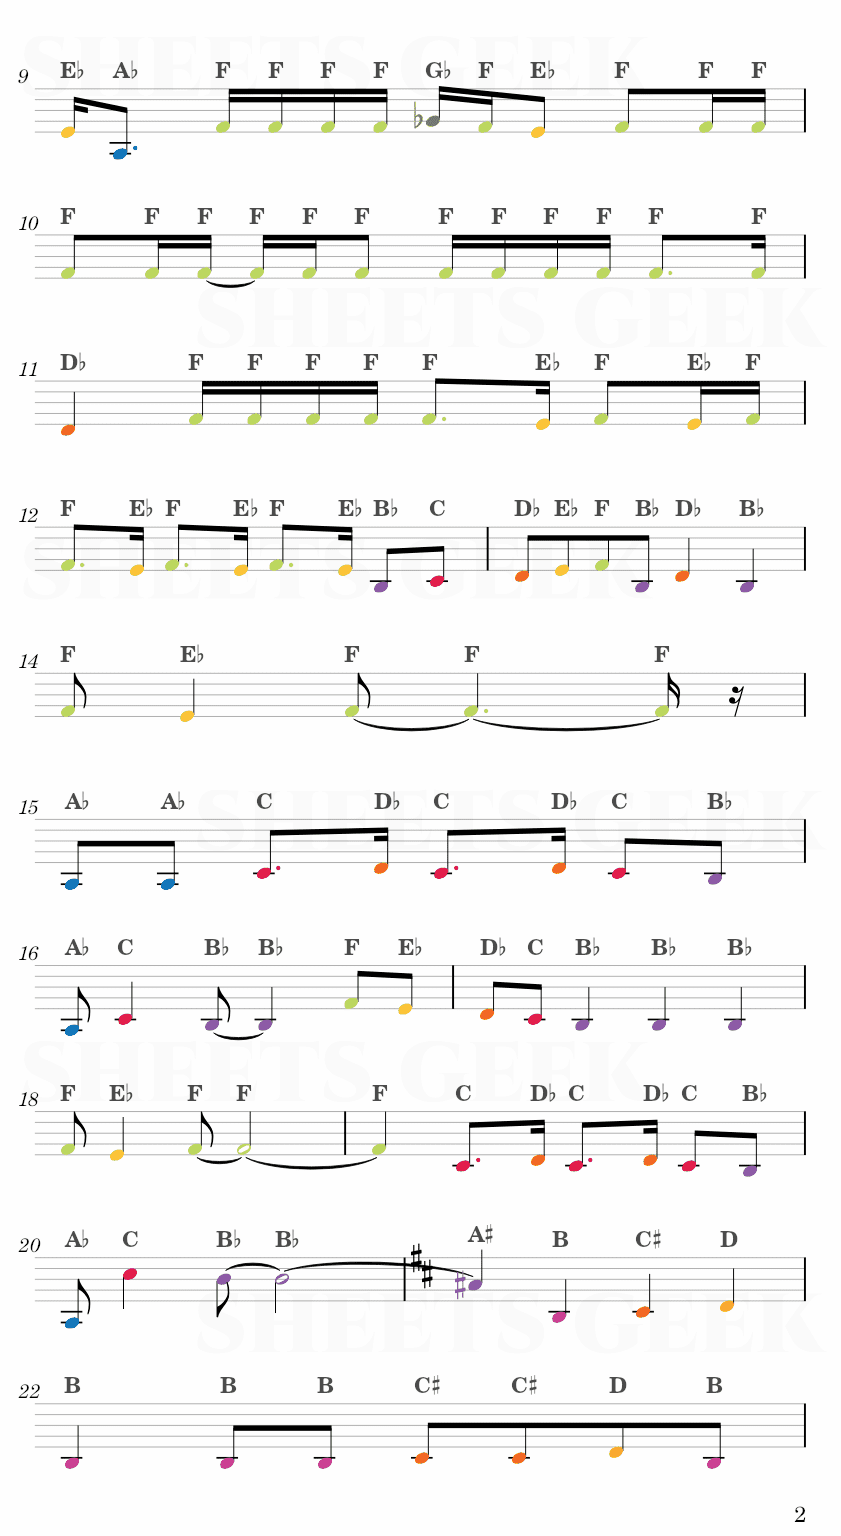 Lost in Paradise - Jujutsu Kaisen Ending 1 Easy Sheet Music Free for piano, keyboard, flute, violin, sax, cello page 2